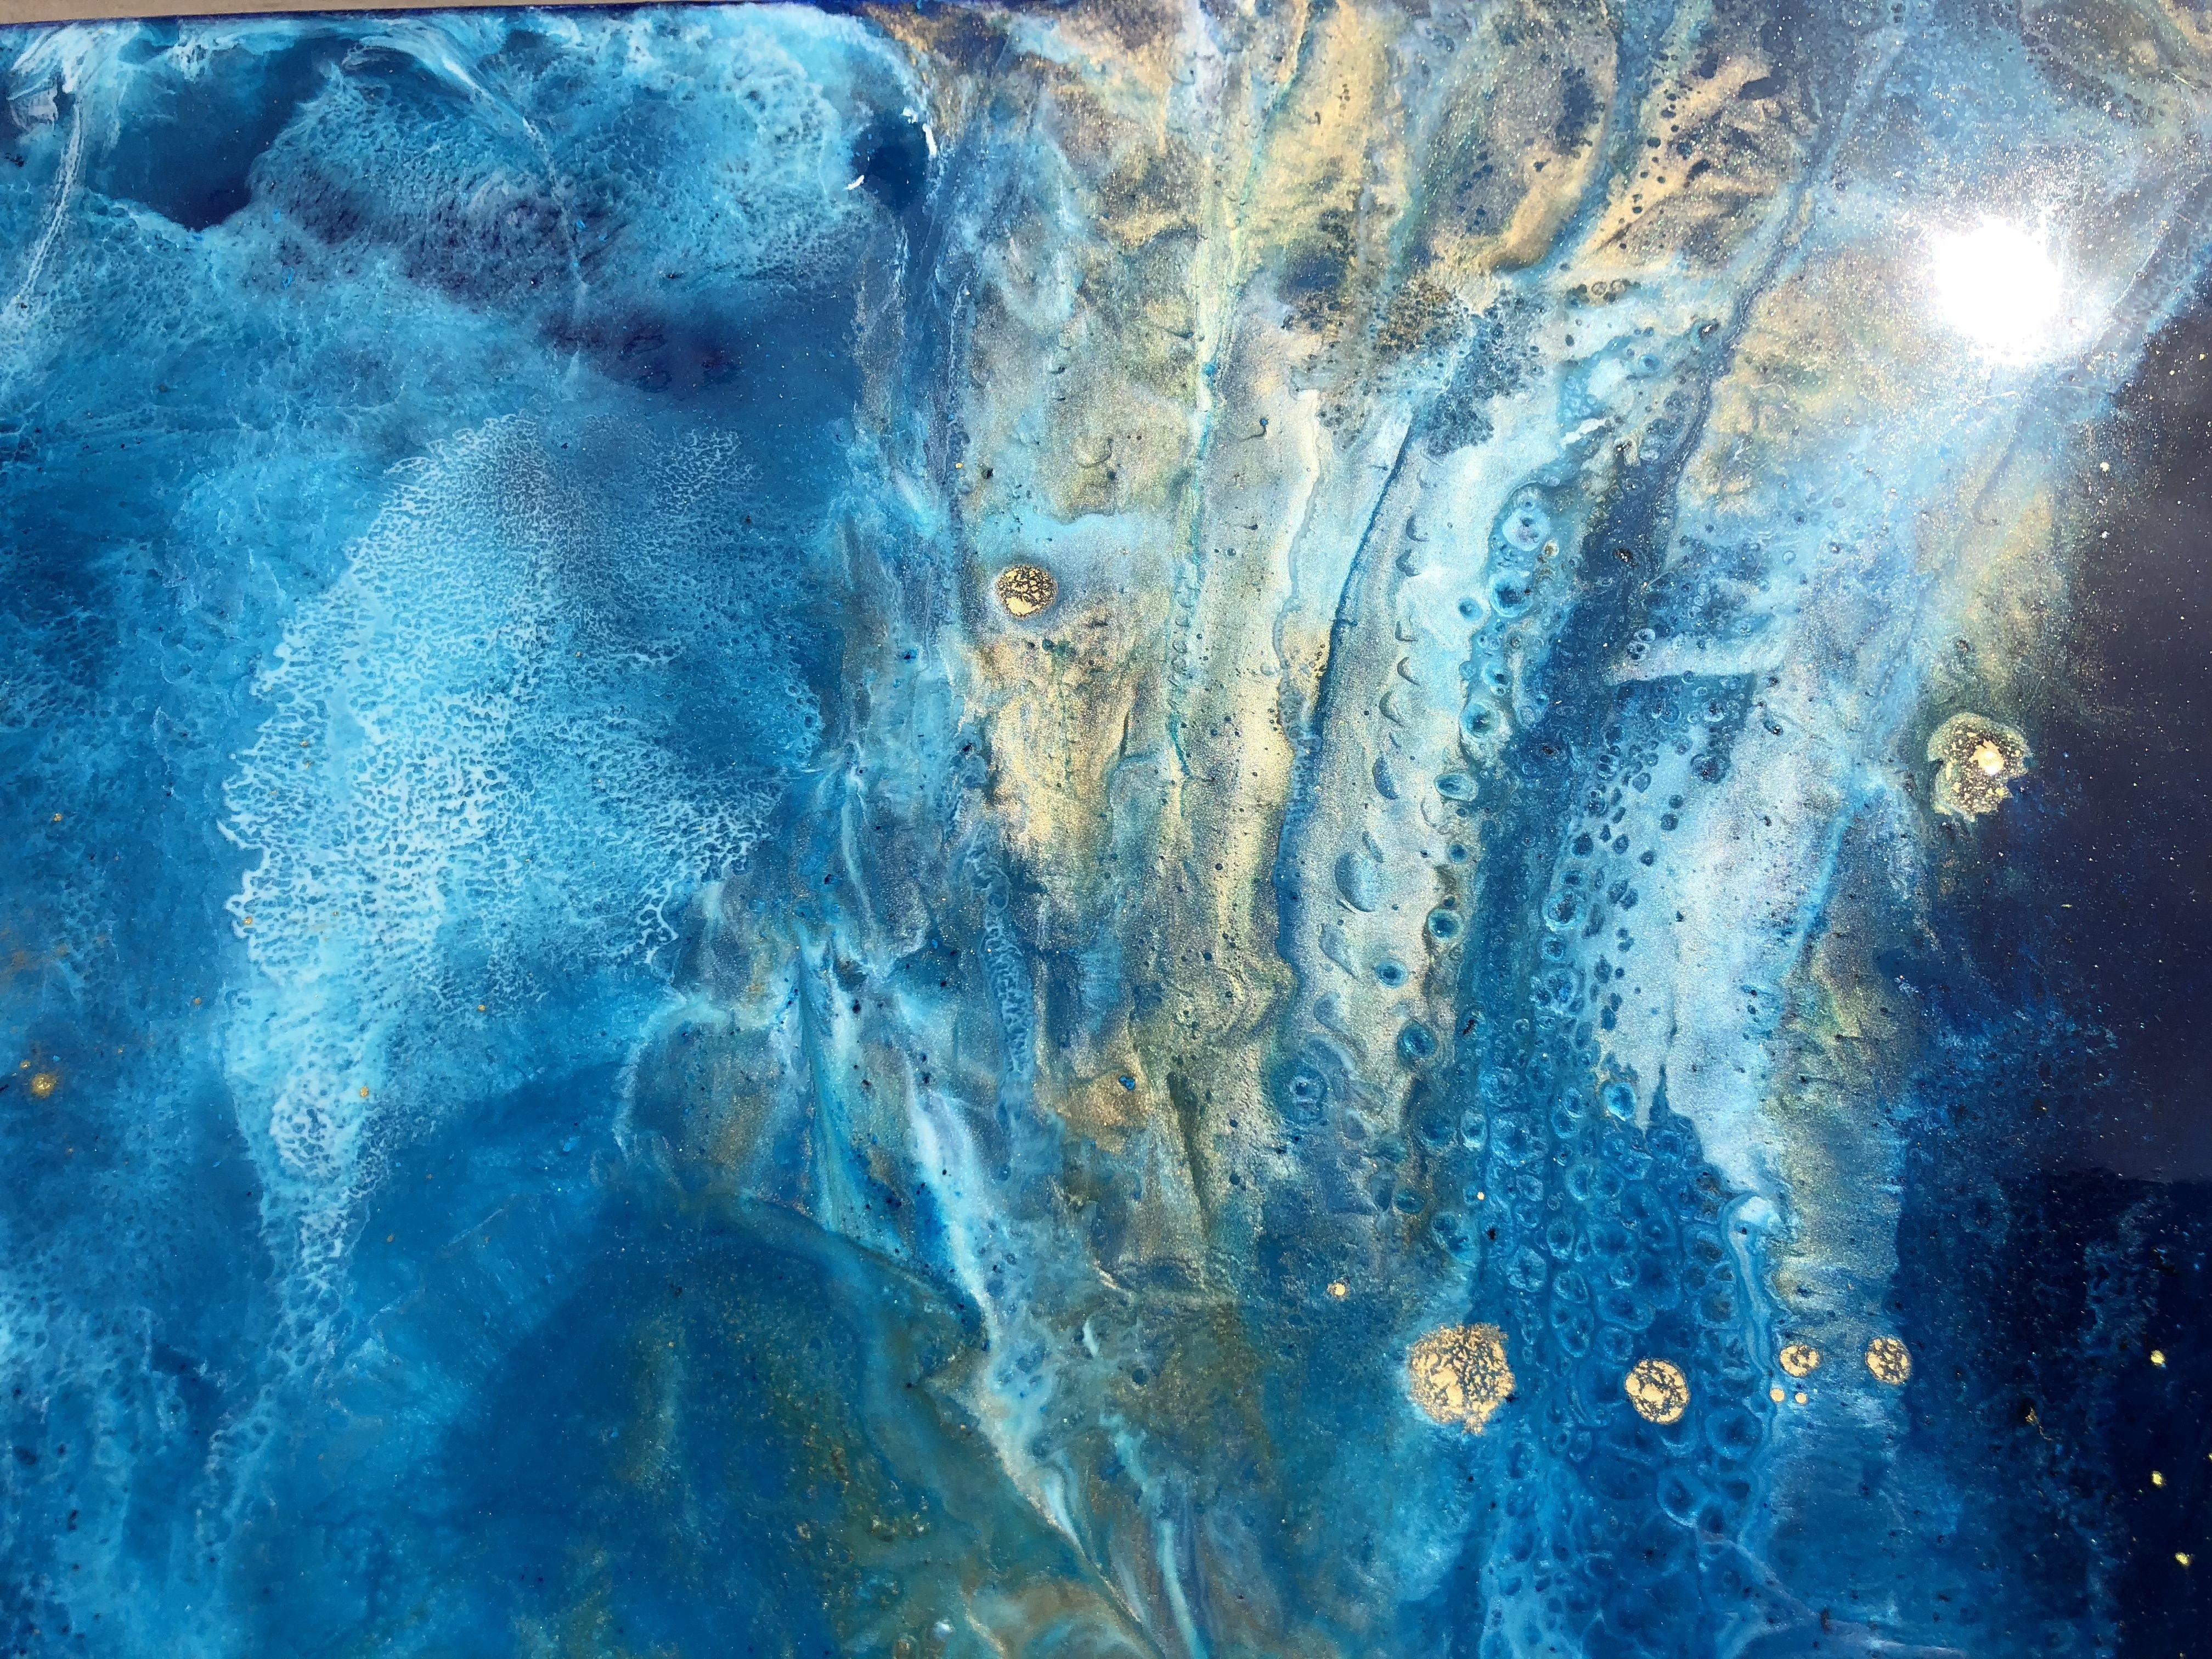 Depths of Cyan, Mixed Media on Canvas 2